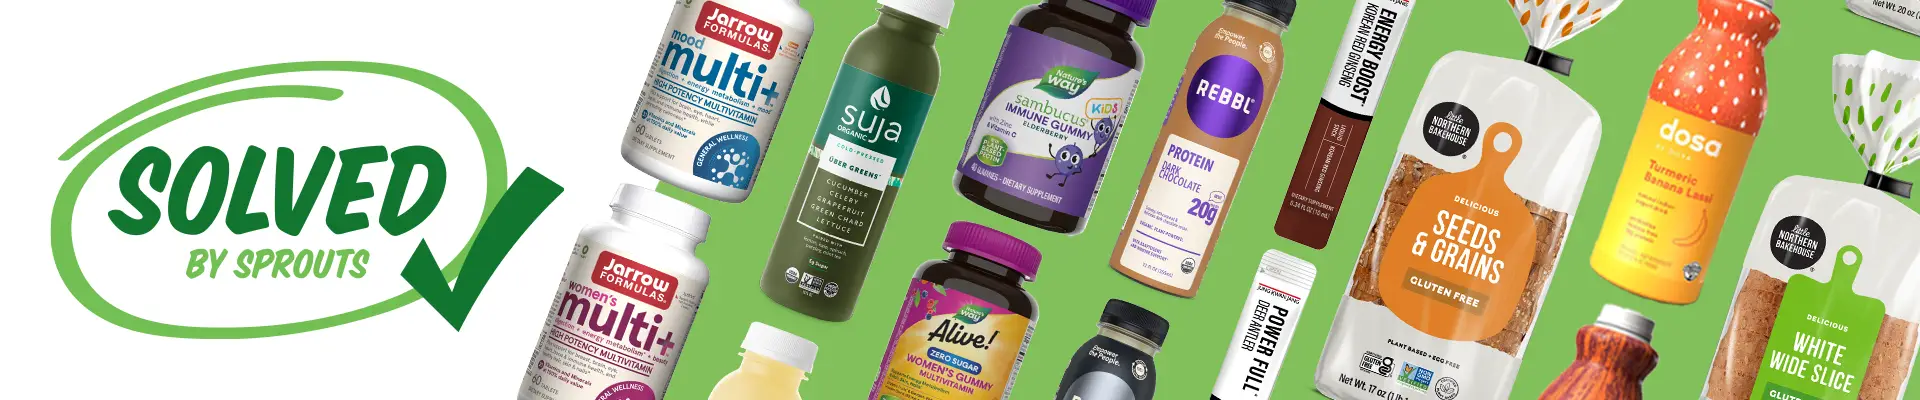 solved by sprouts logo next to back-to-school wellness items